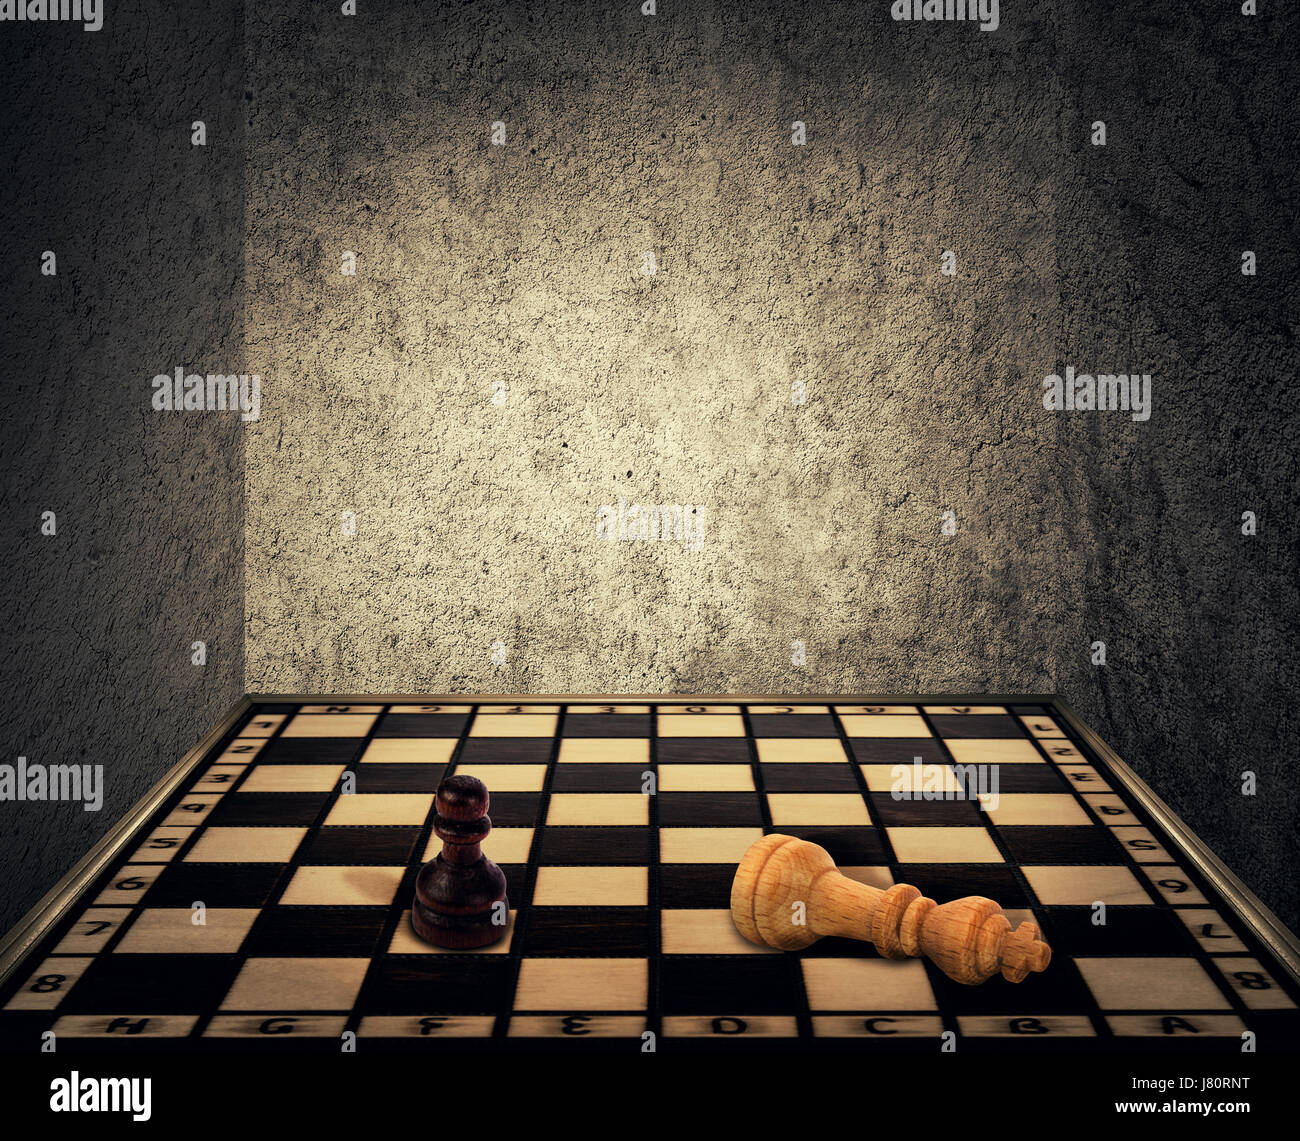 Magical room with a chess board floor surrounded by concrete walls as limitations and the king piece falling down beaten in front of the pawn figure.  Stock Photo